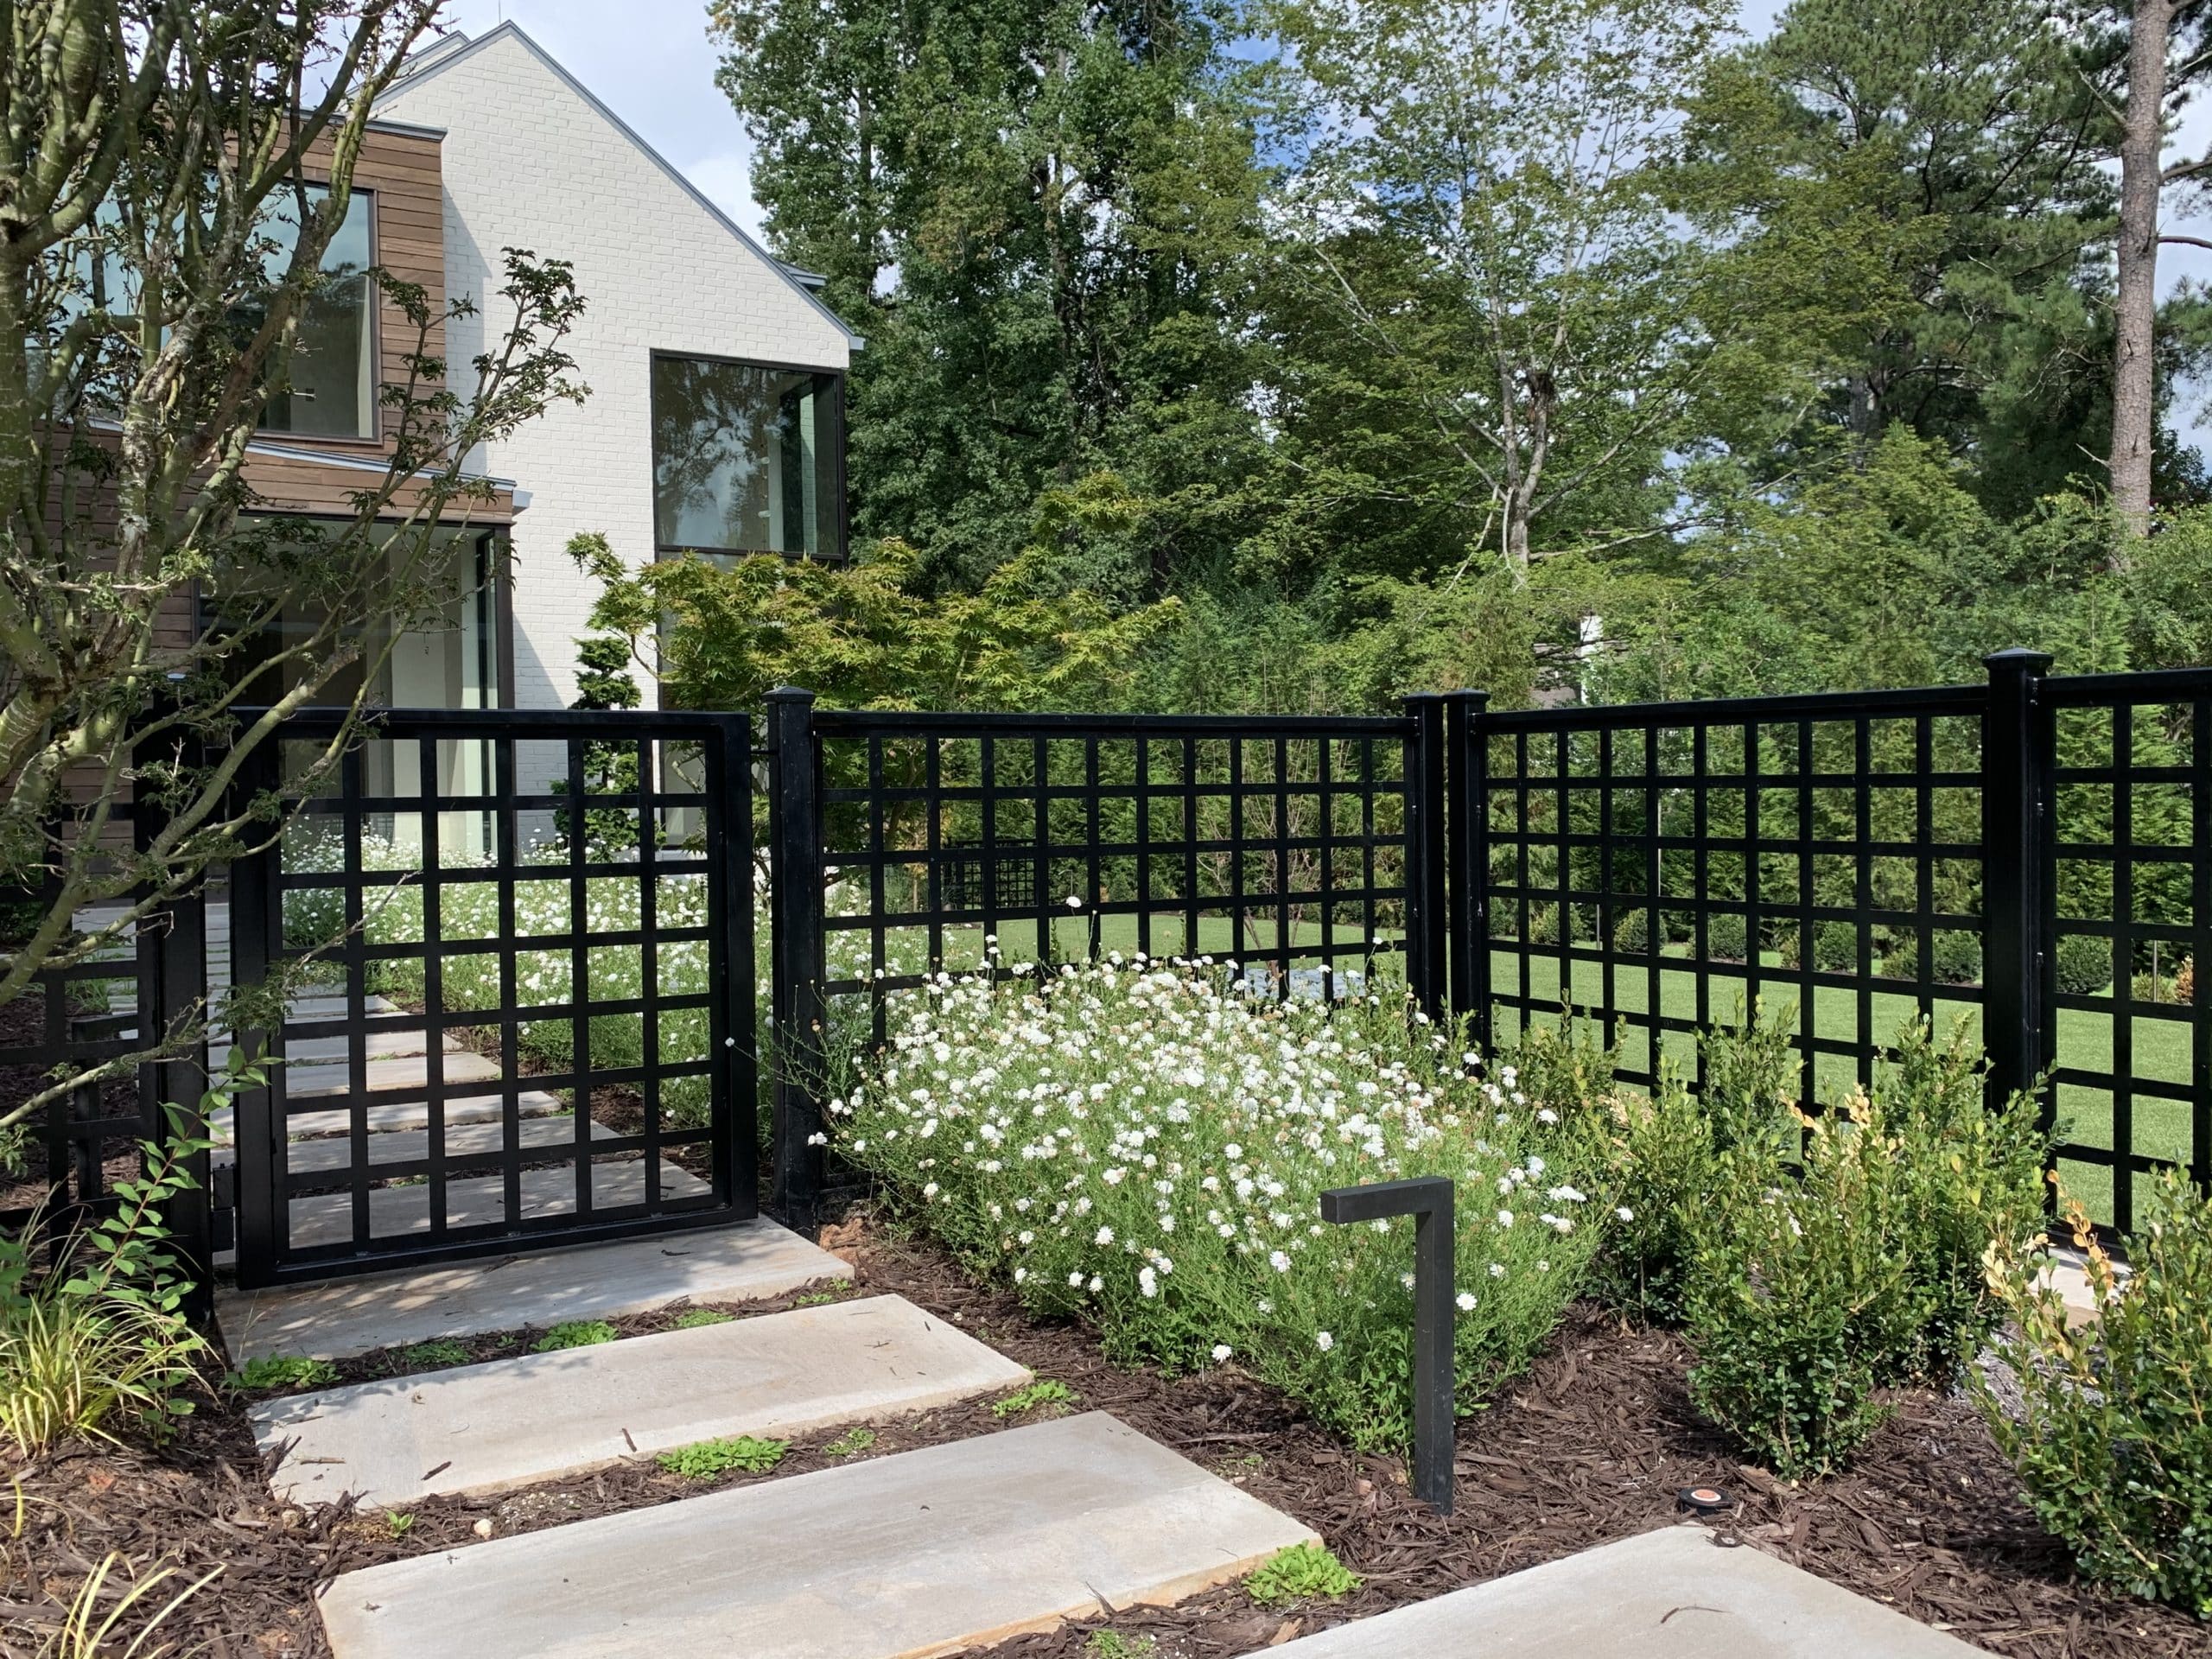 34 Front Yard Fence Ideas And Tips From Our Design Team | Yardzen